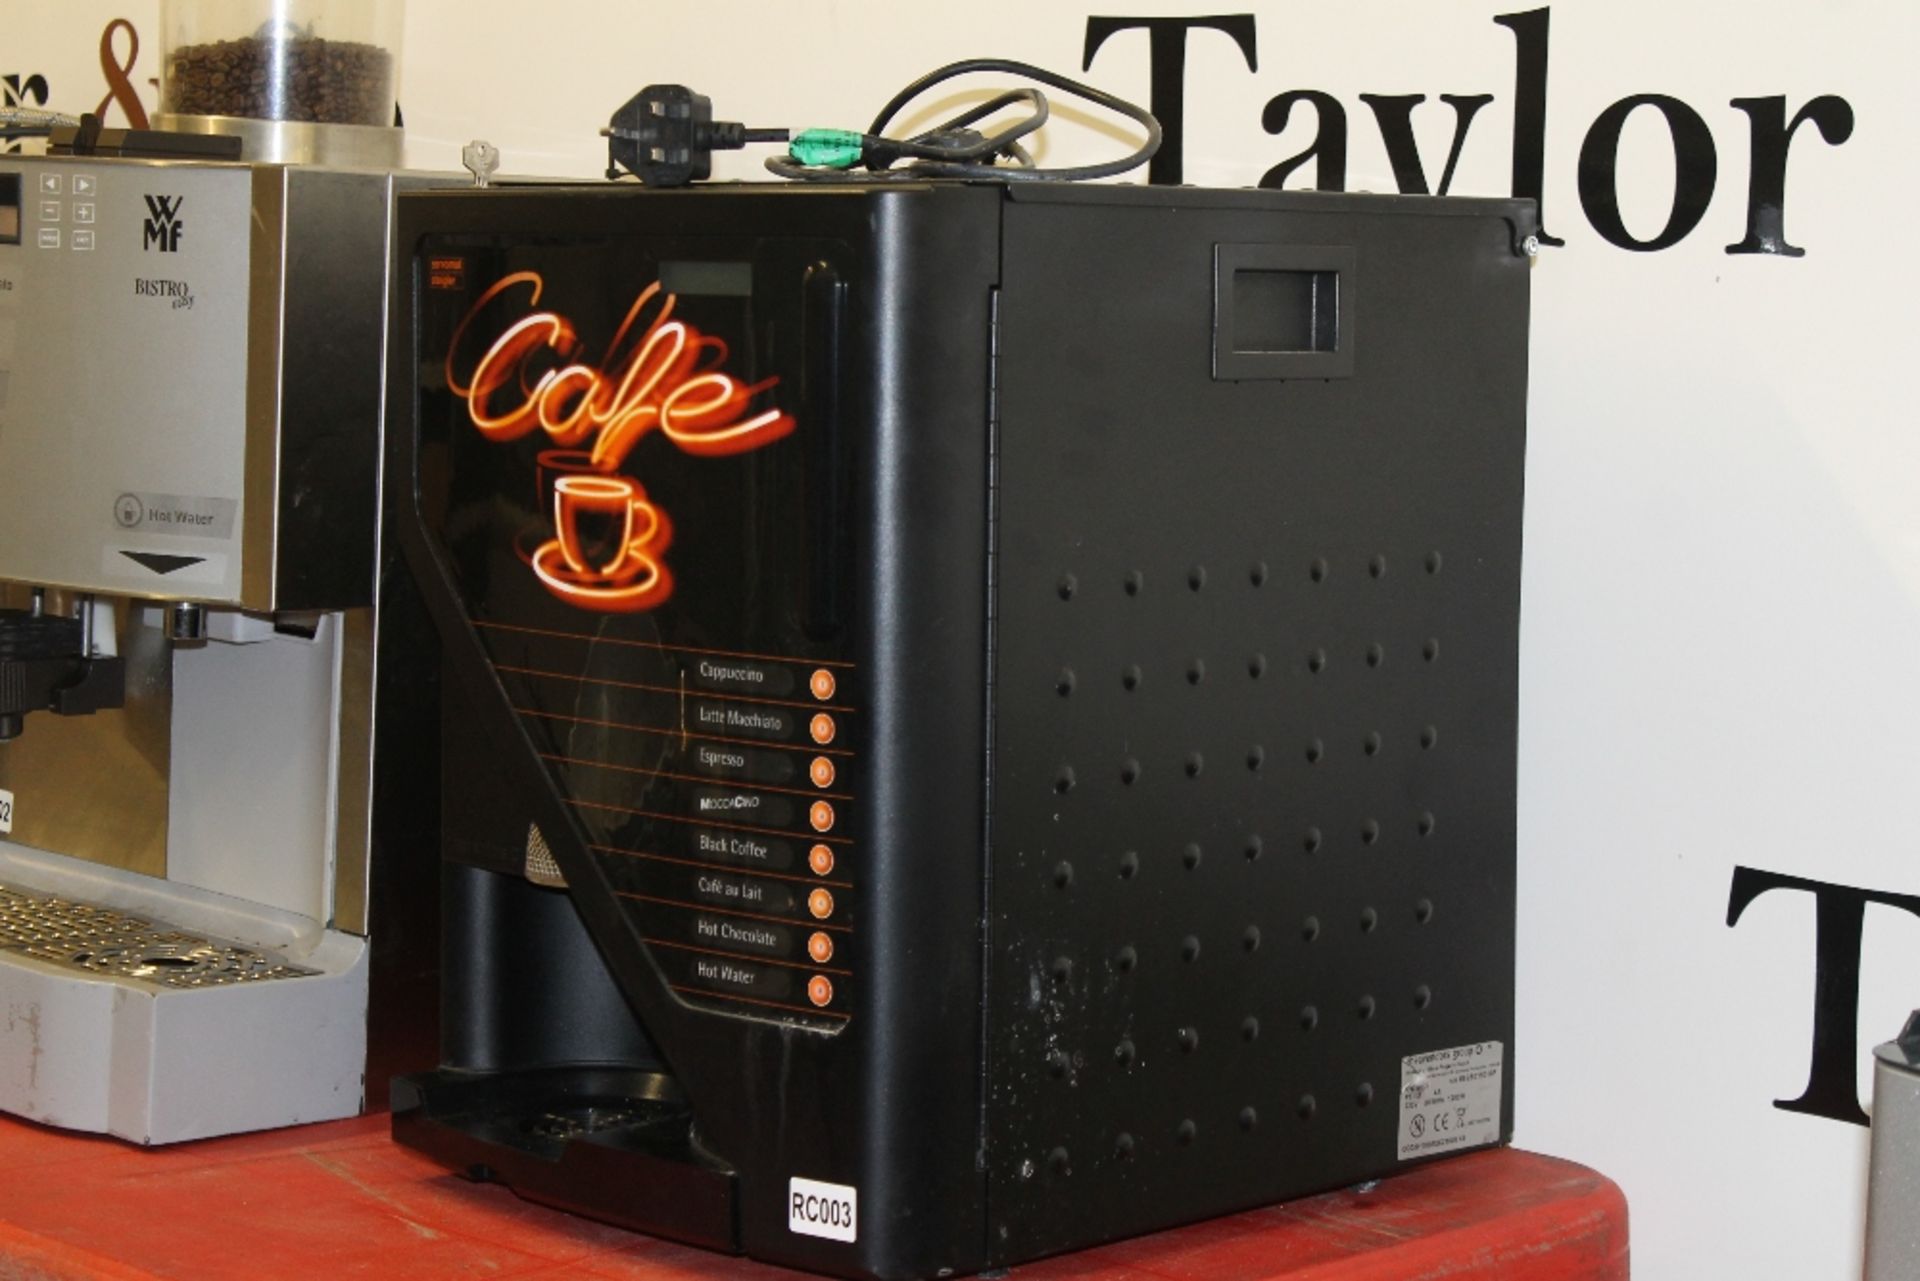 Servomat Steigler Coffee Vending Machine – Single tupe xs - made by Rhea Projects S.P.A. - with Key - Image 2 of 2